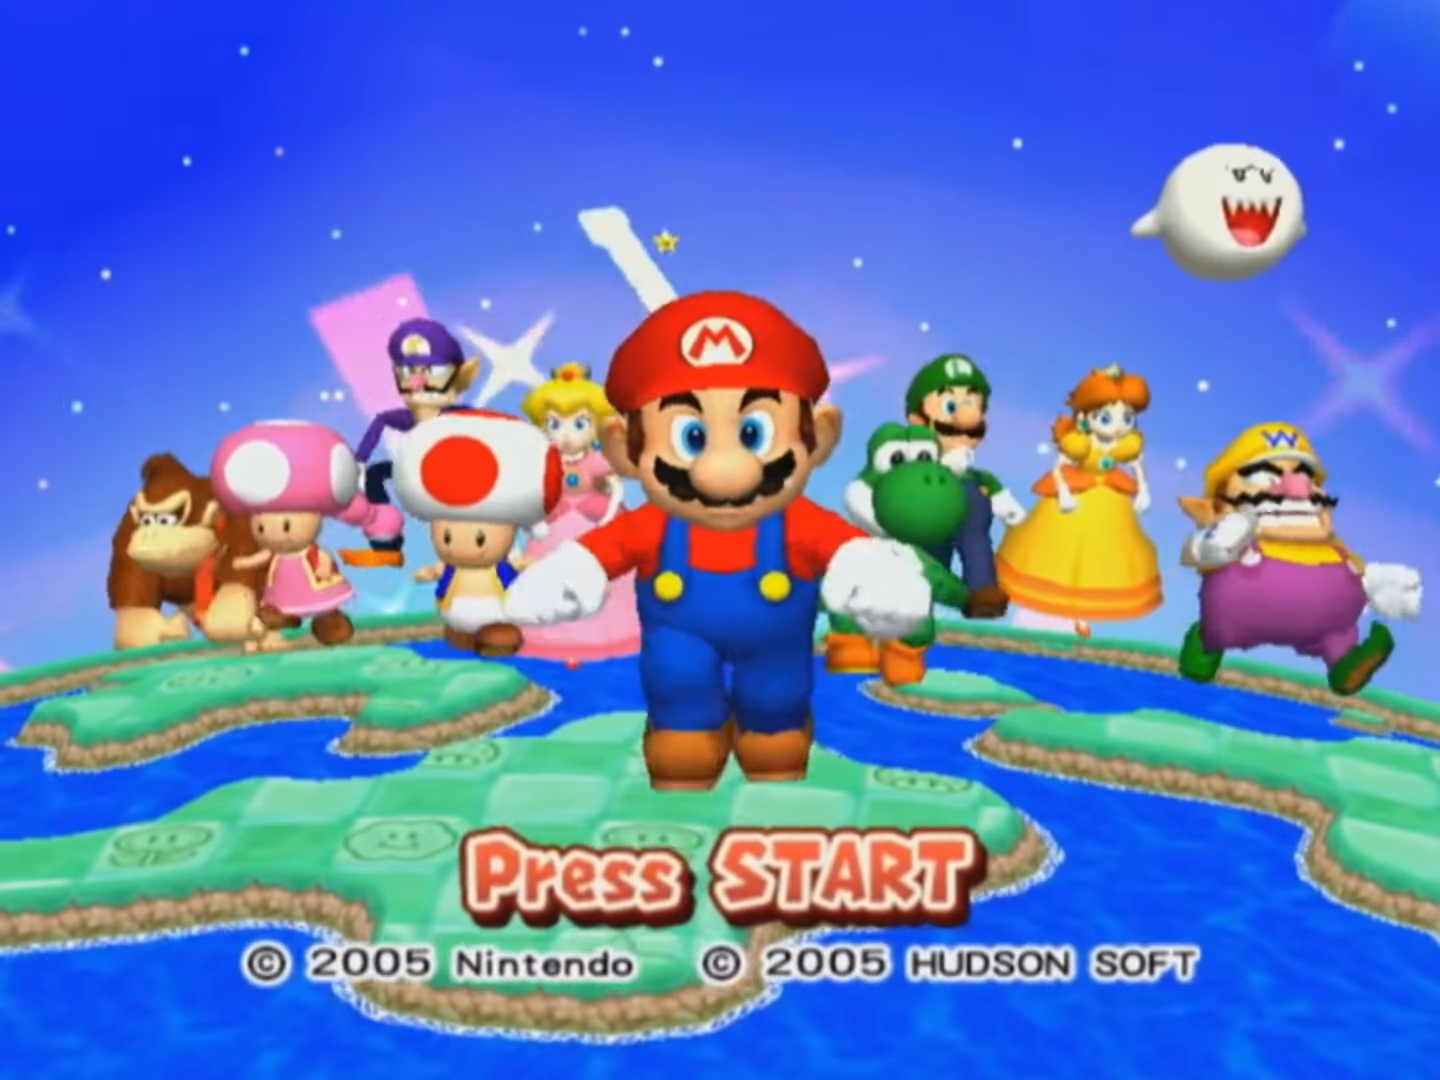 Super Mario Party Review. Among the series' best entries, but